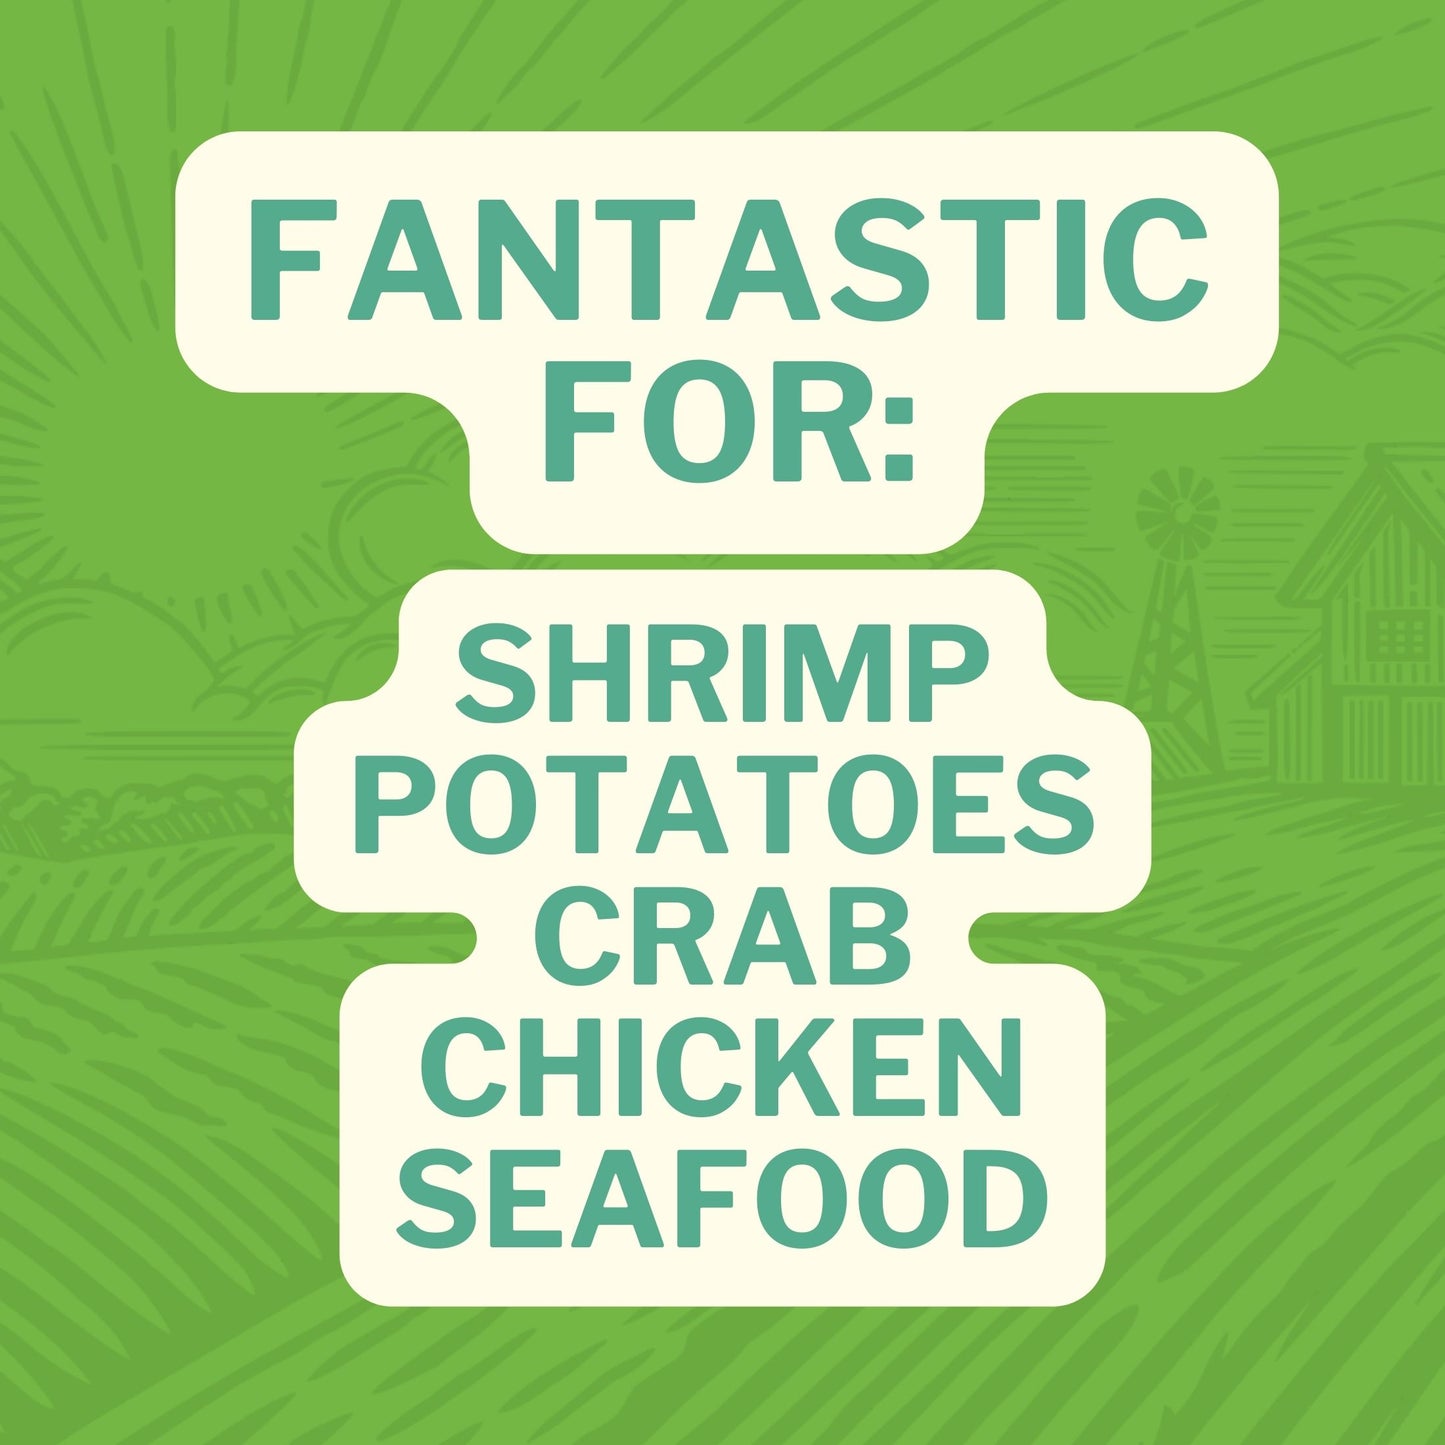 Fantastic With: Shrimp Potatoes Crab Chicken Seafood